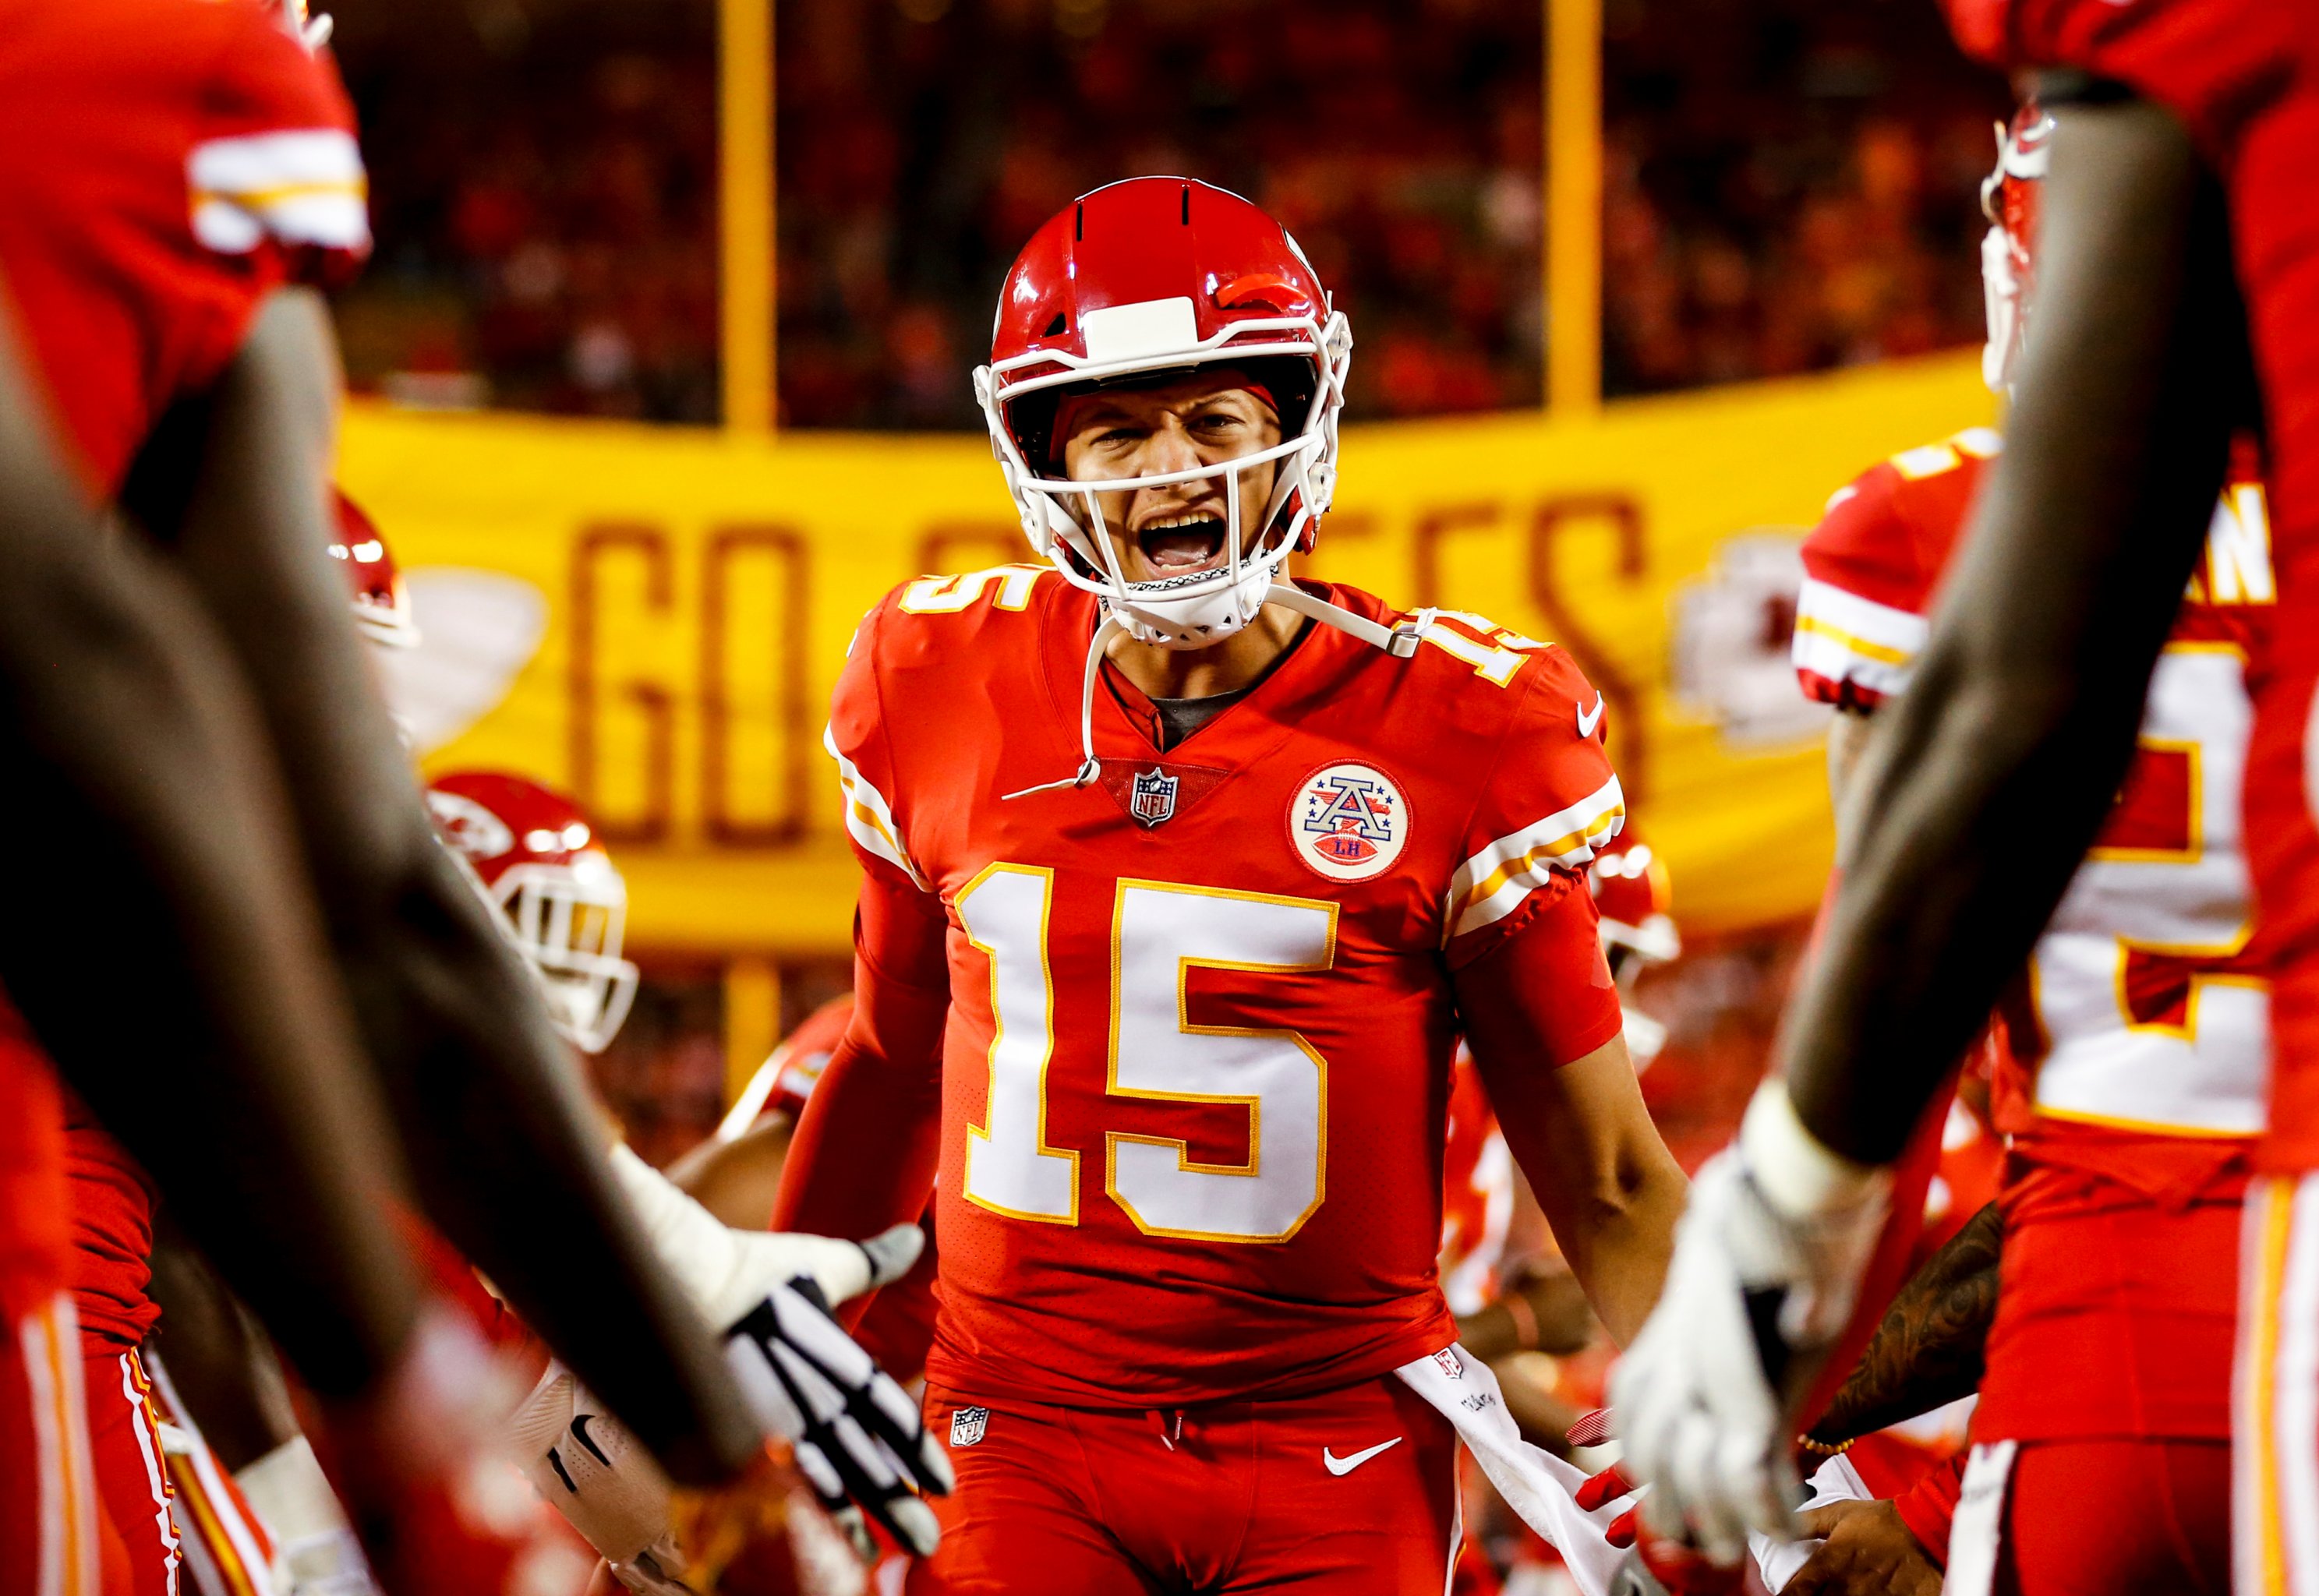 Points and Highlights: Kansas City Chiefs 17-6 Jacksonville Jaguars in NFL